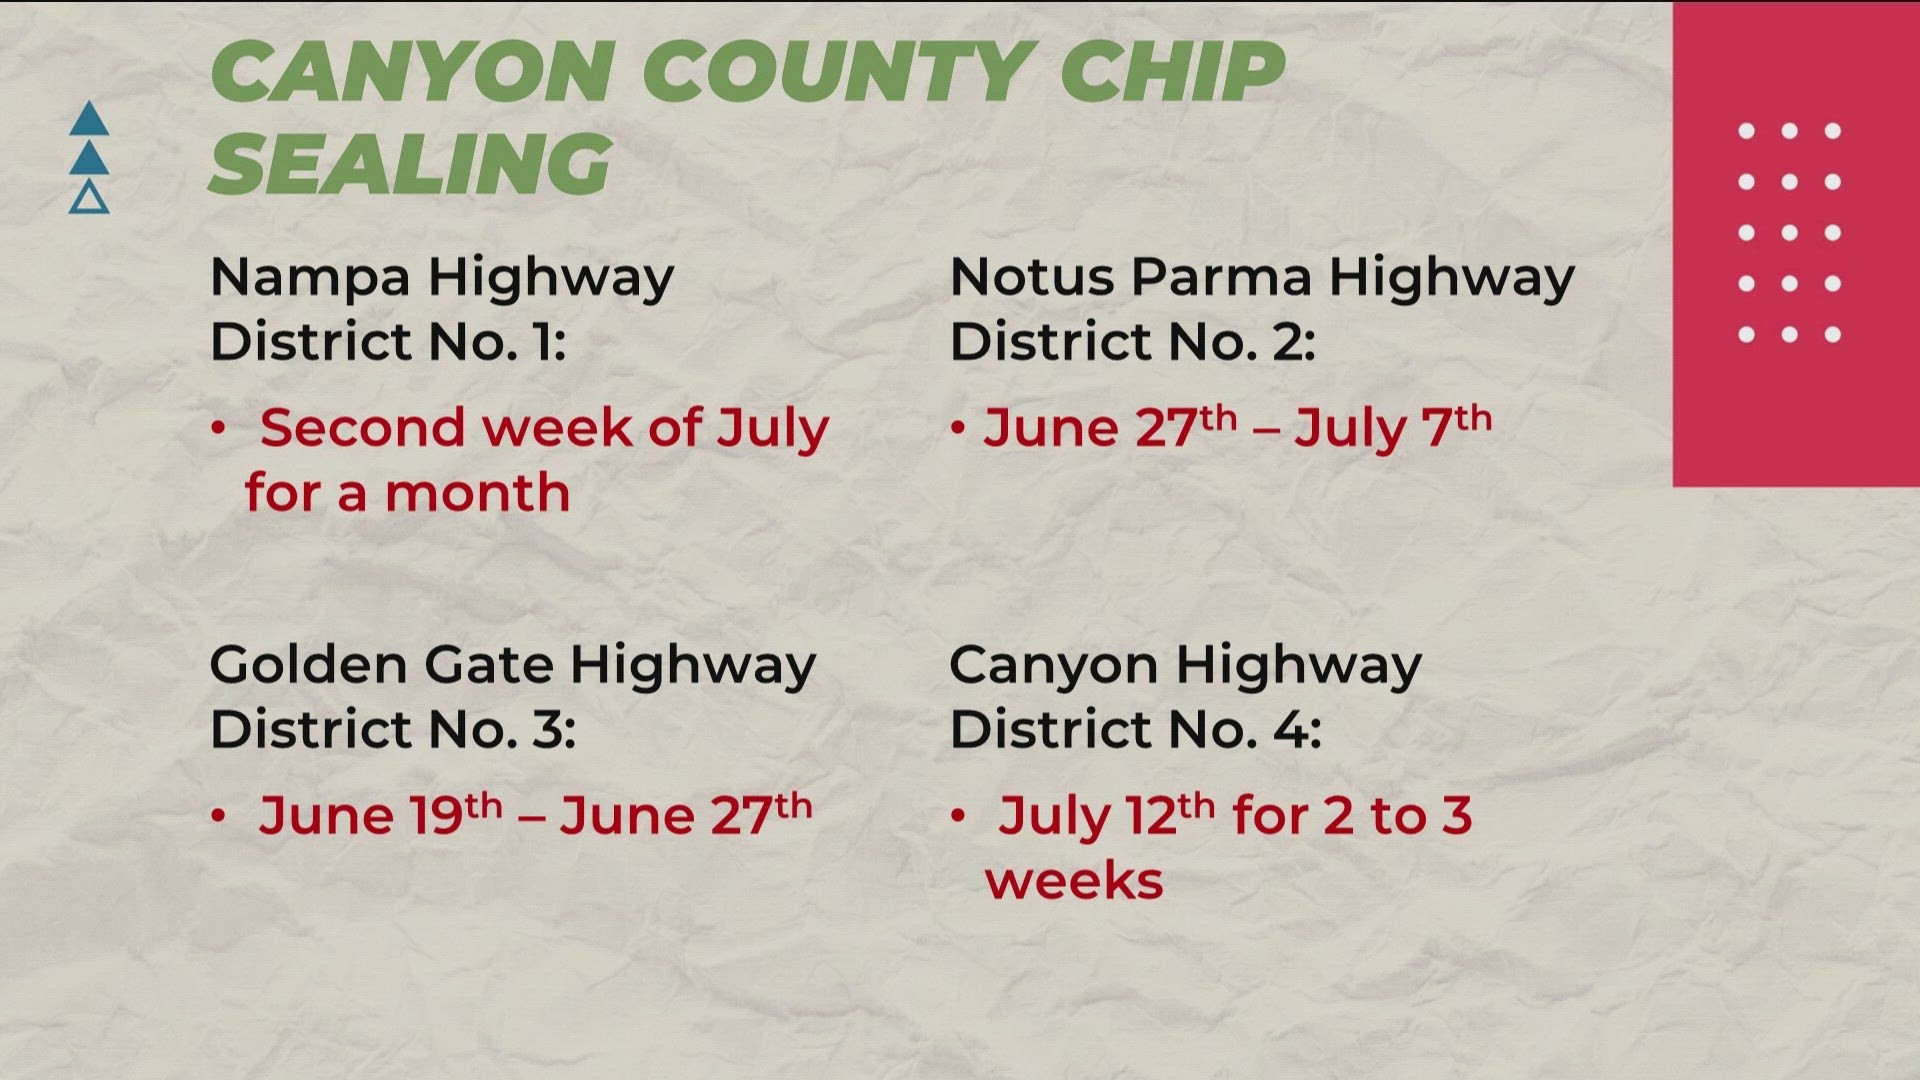 Canyon County is split into four sections, making it hard to get all of the road work information.